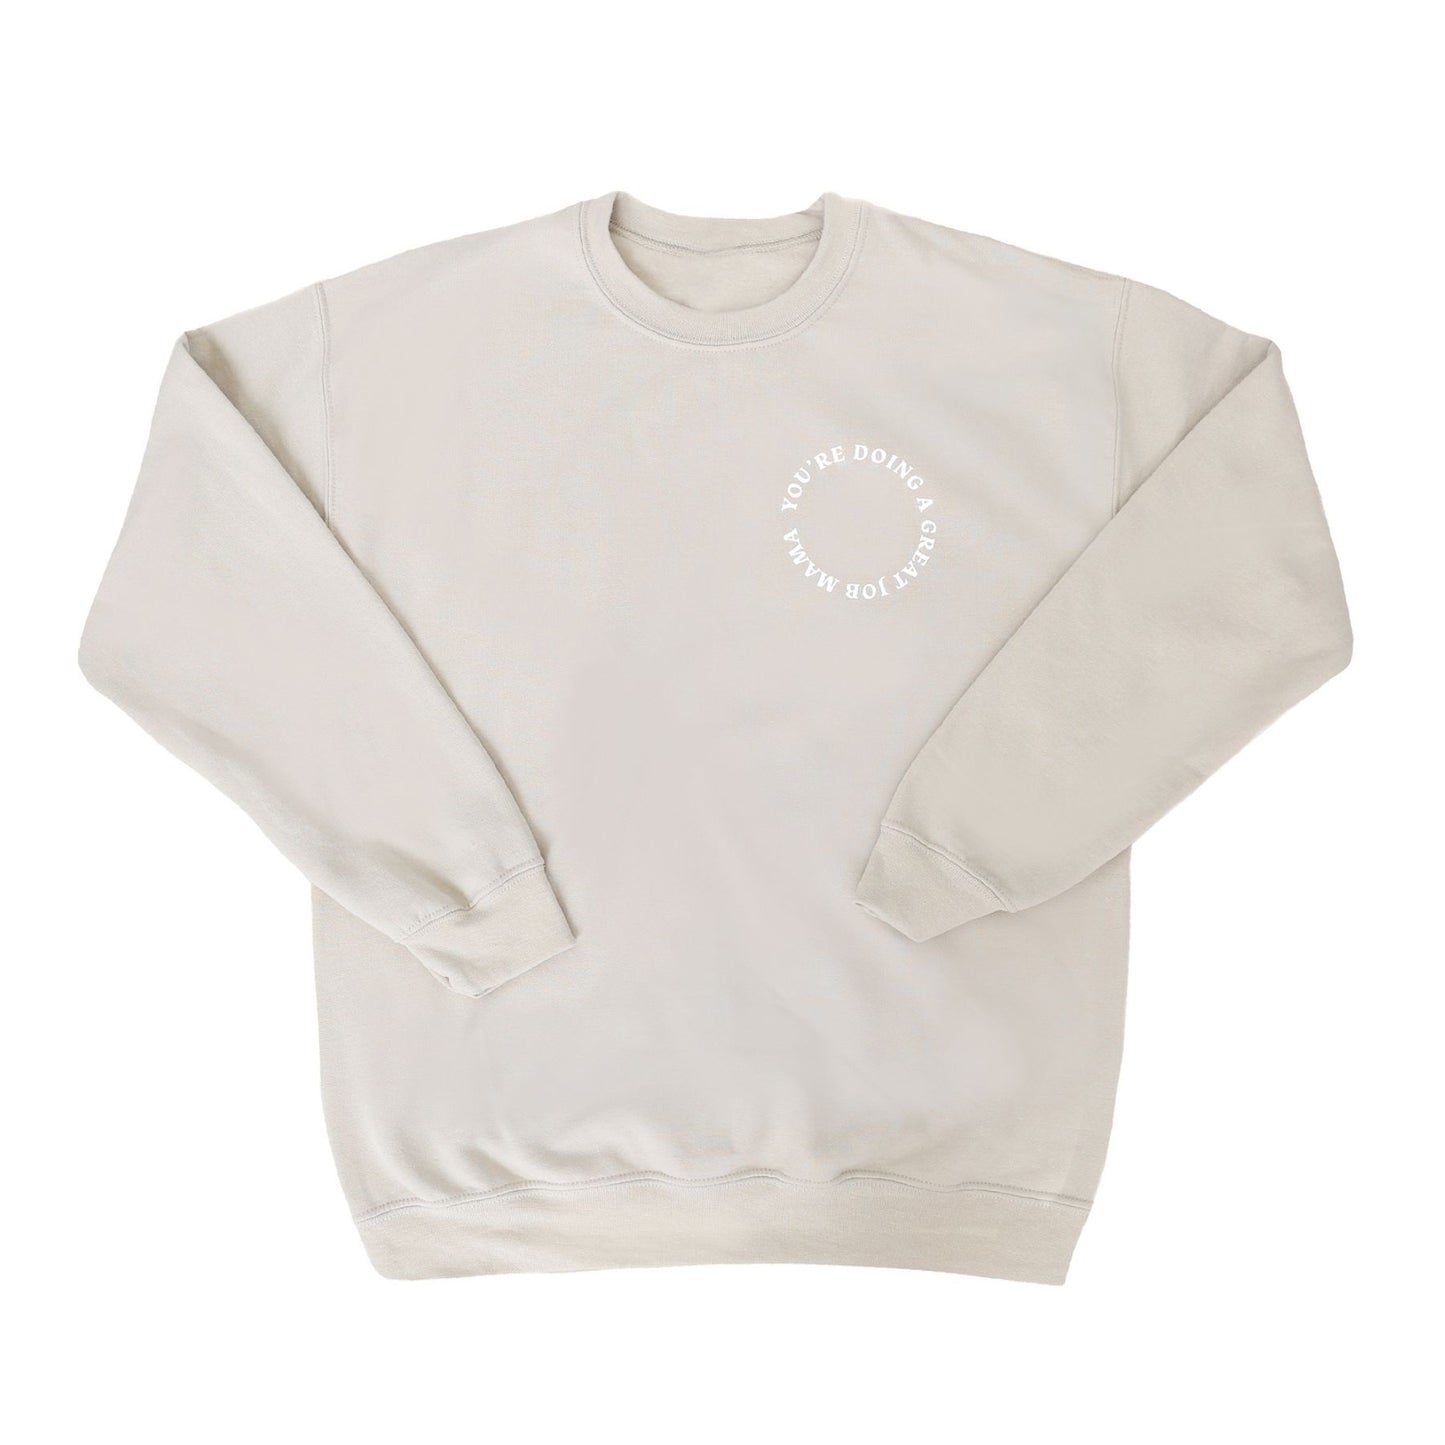 The Baby Cubby Crewneck Sweatshirt - You're Doing A Great Job Mama - Sand